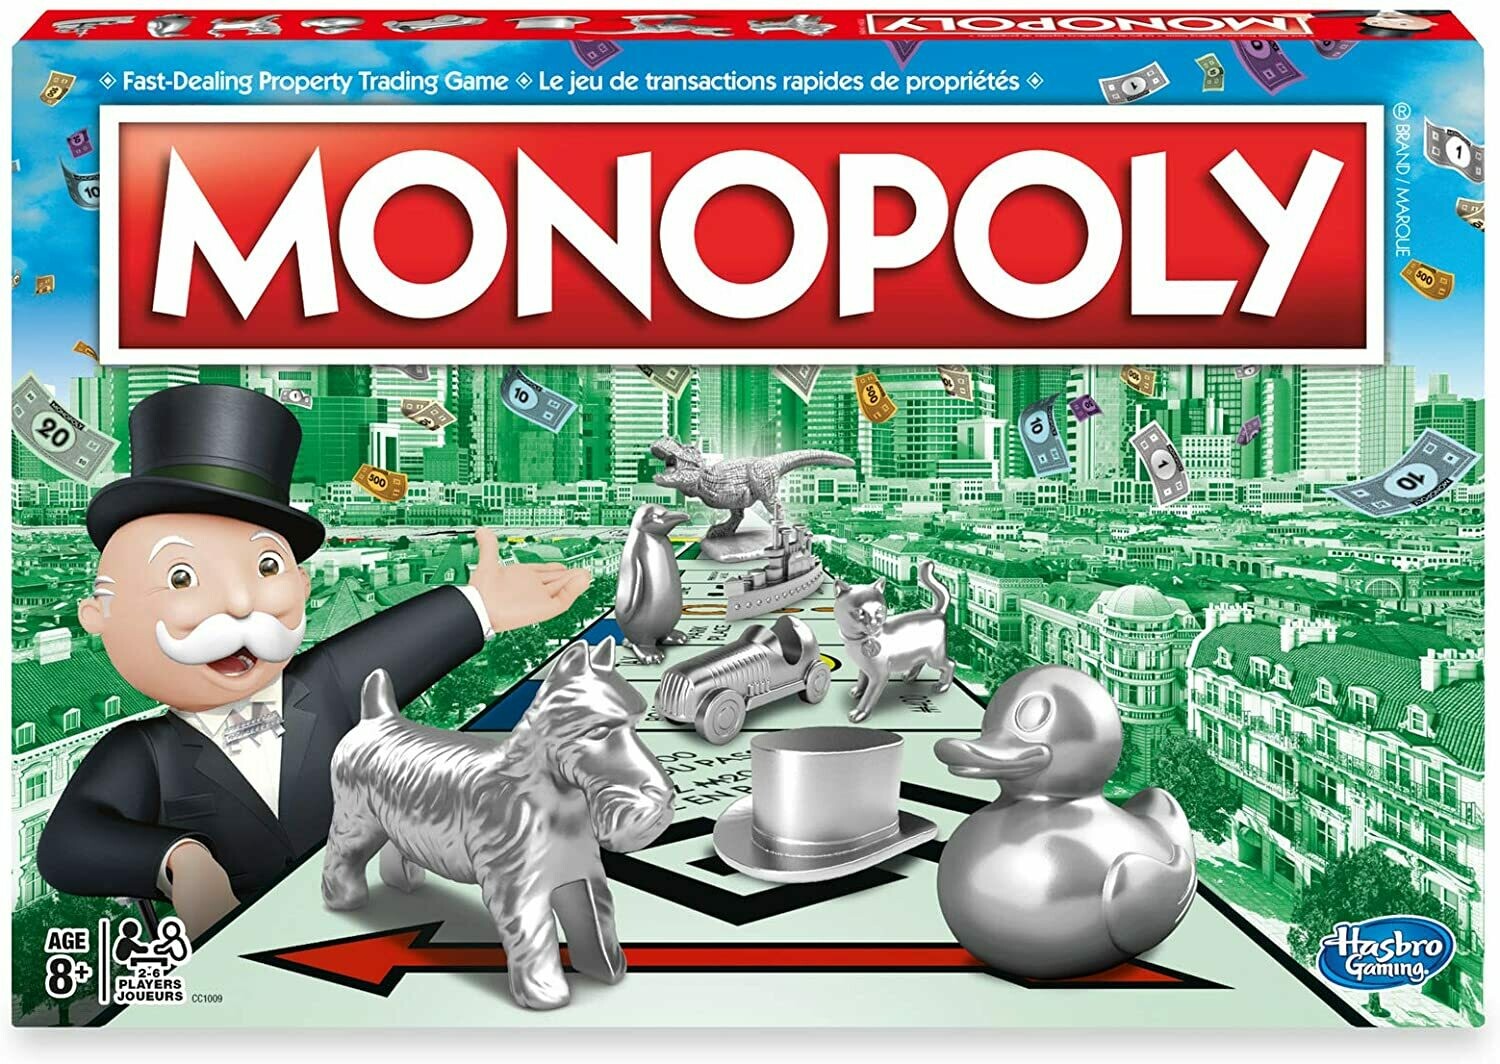 Have you play the classic “Monopoly” game before?